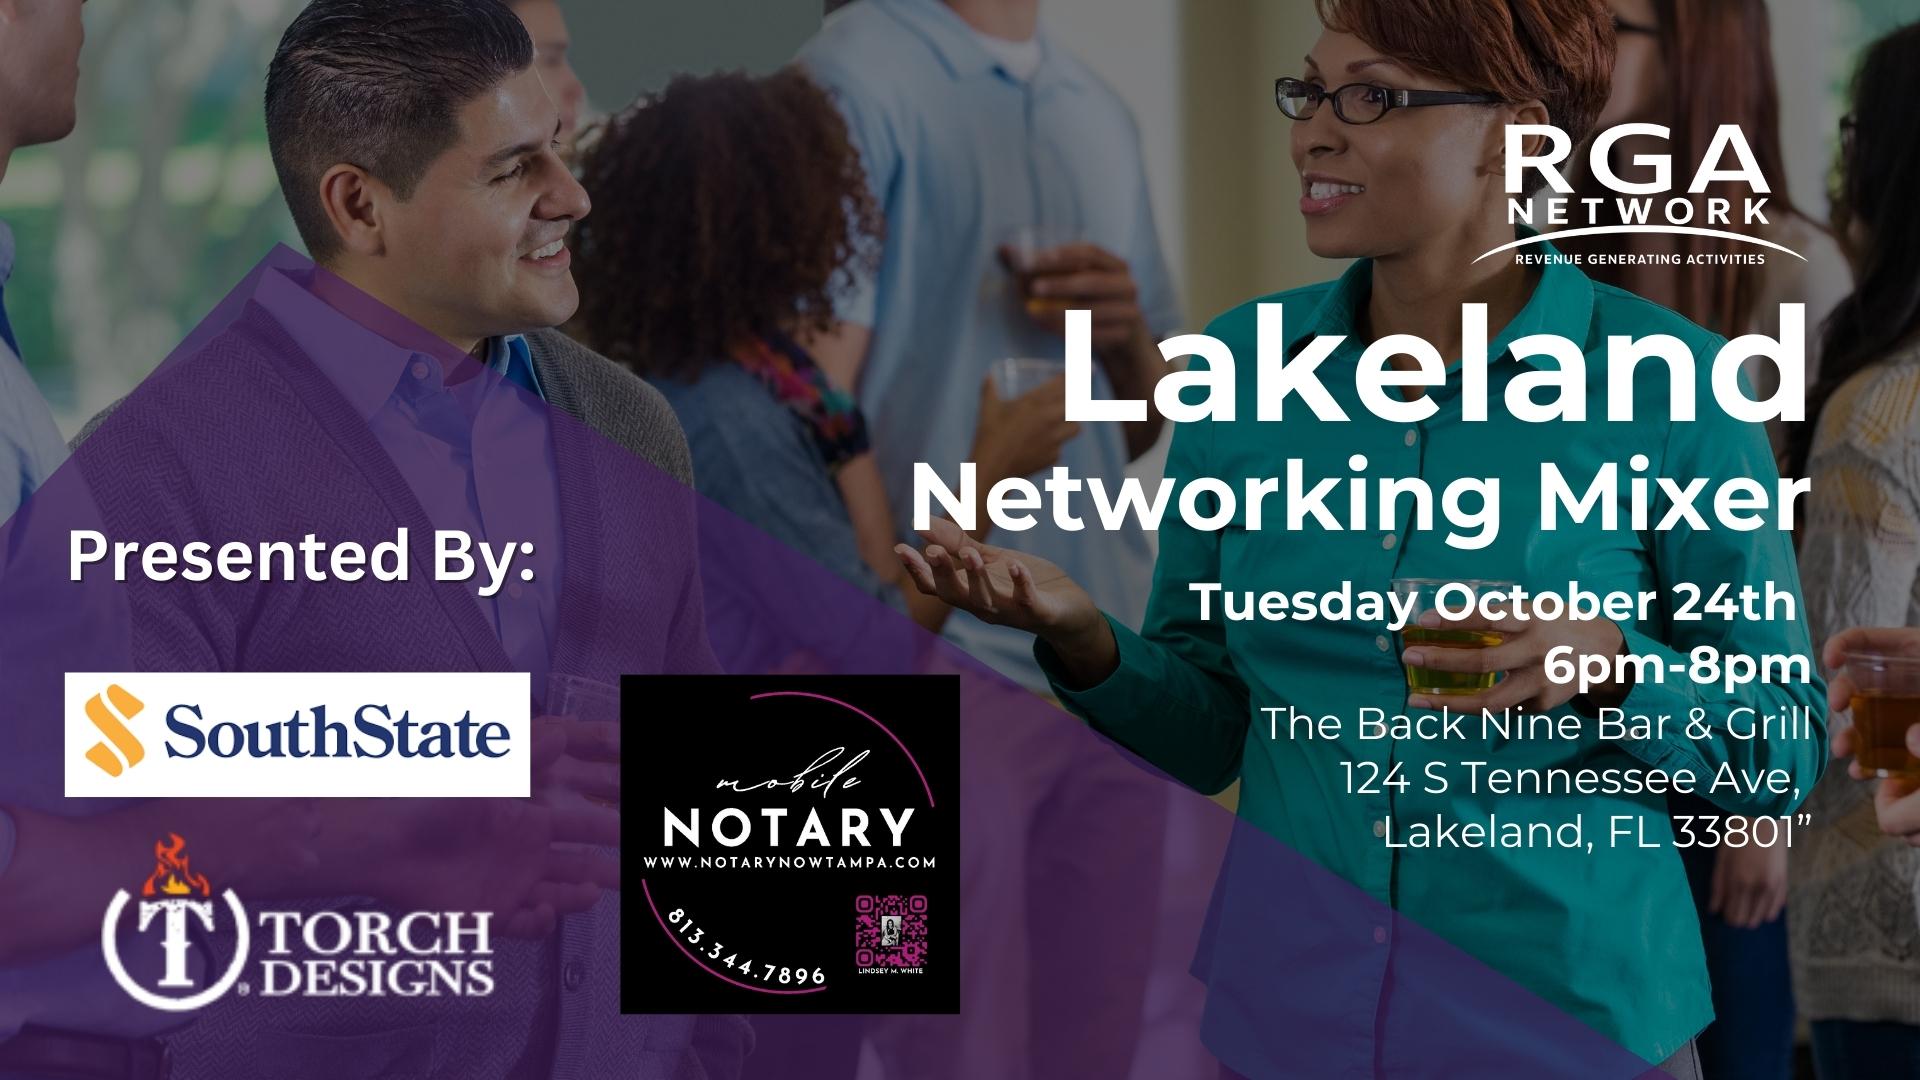 Tuesday Oct 24th Lakeland Networking Mixer 6PM